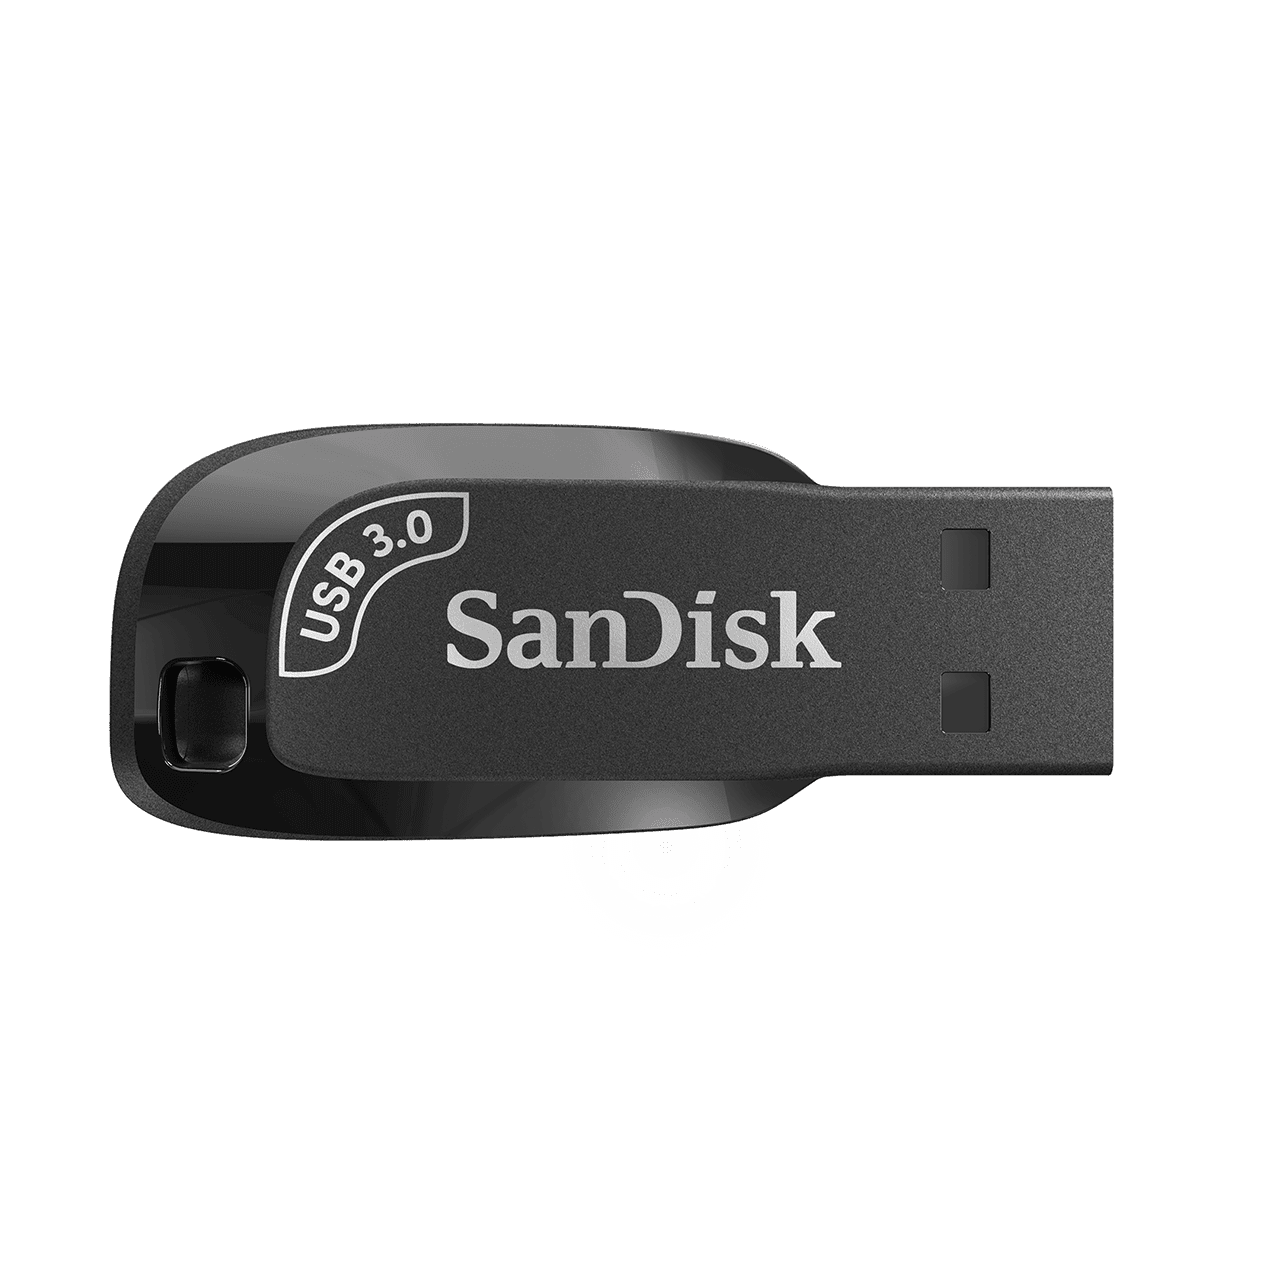 Buy SanDisk 32GB Ultra Shift USB 3.0 Flash Drive SDCZ410-032G-G46 discounted | Products On Sale Australia